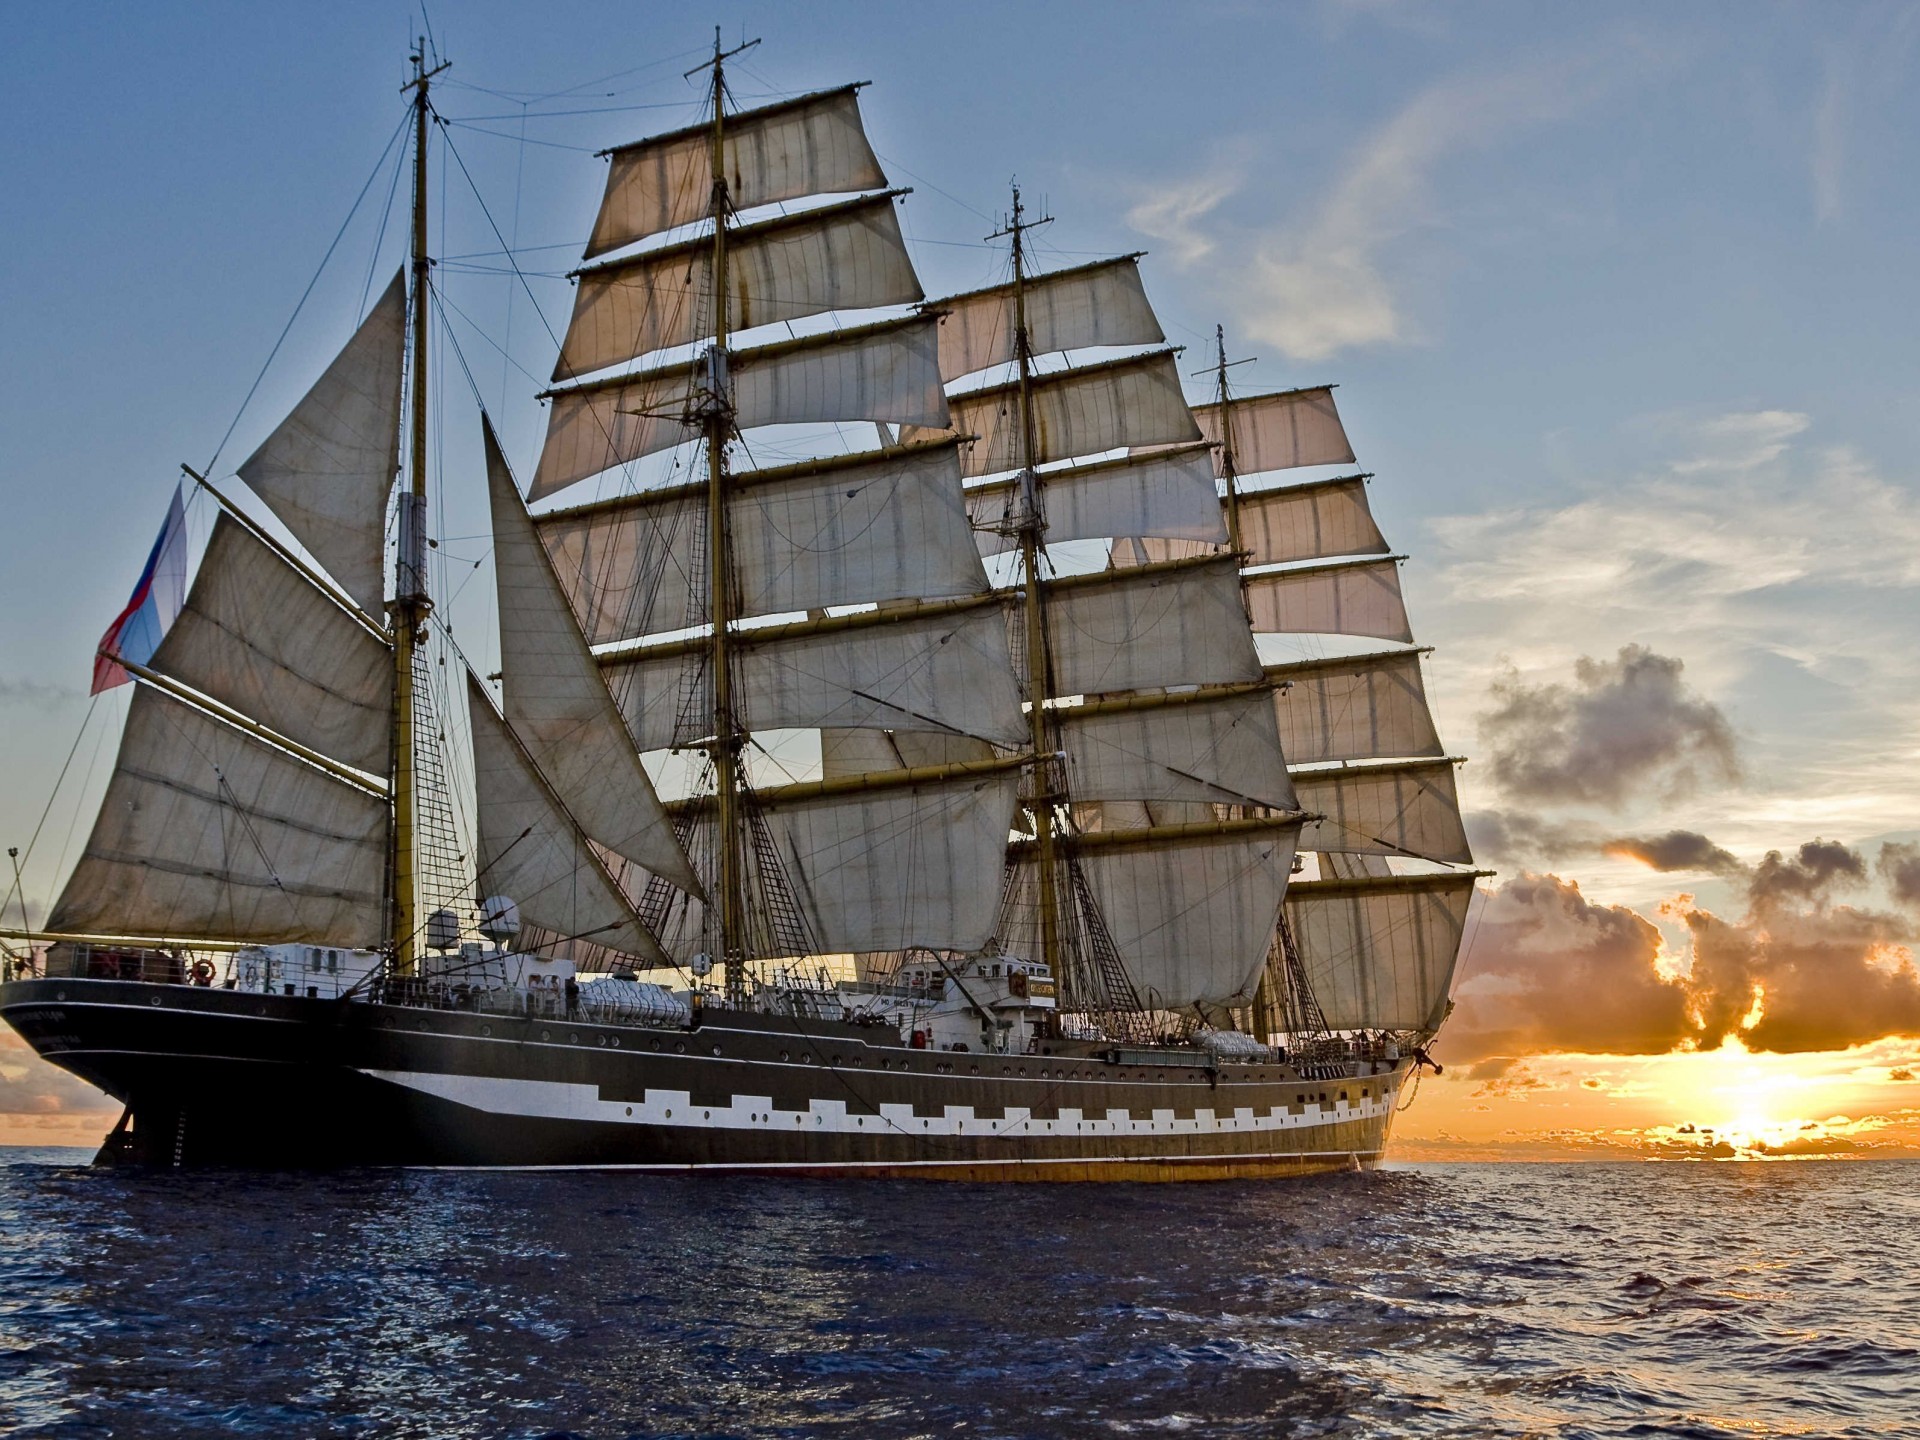 Old Wooden Sailing Ships 877 : Wallpapers13